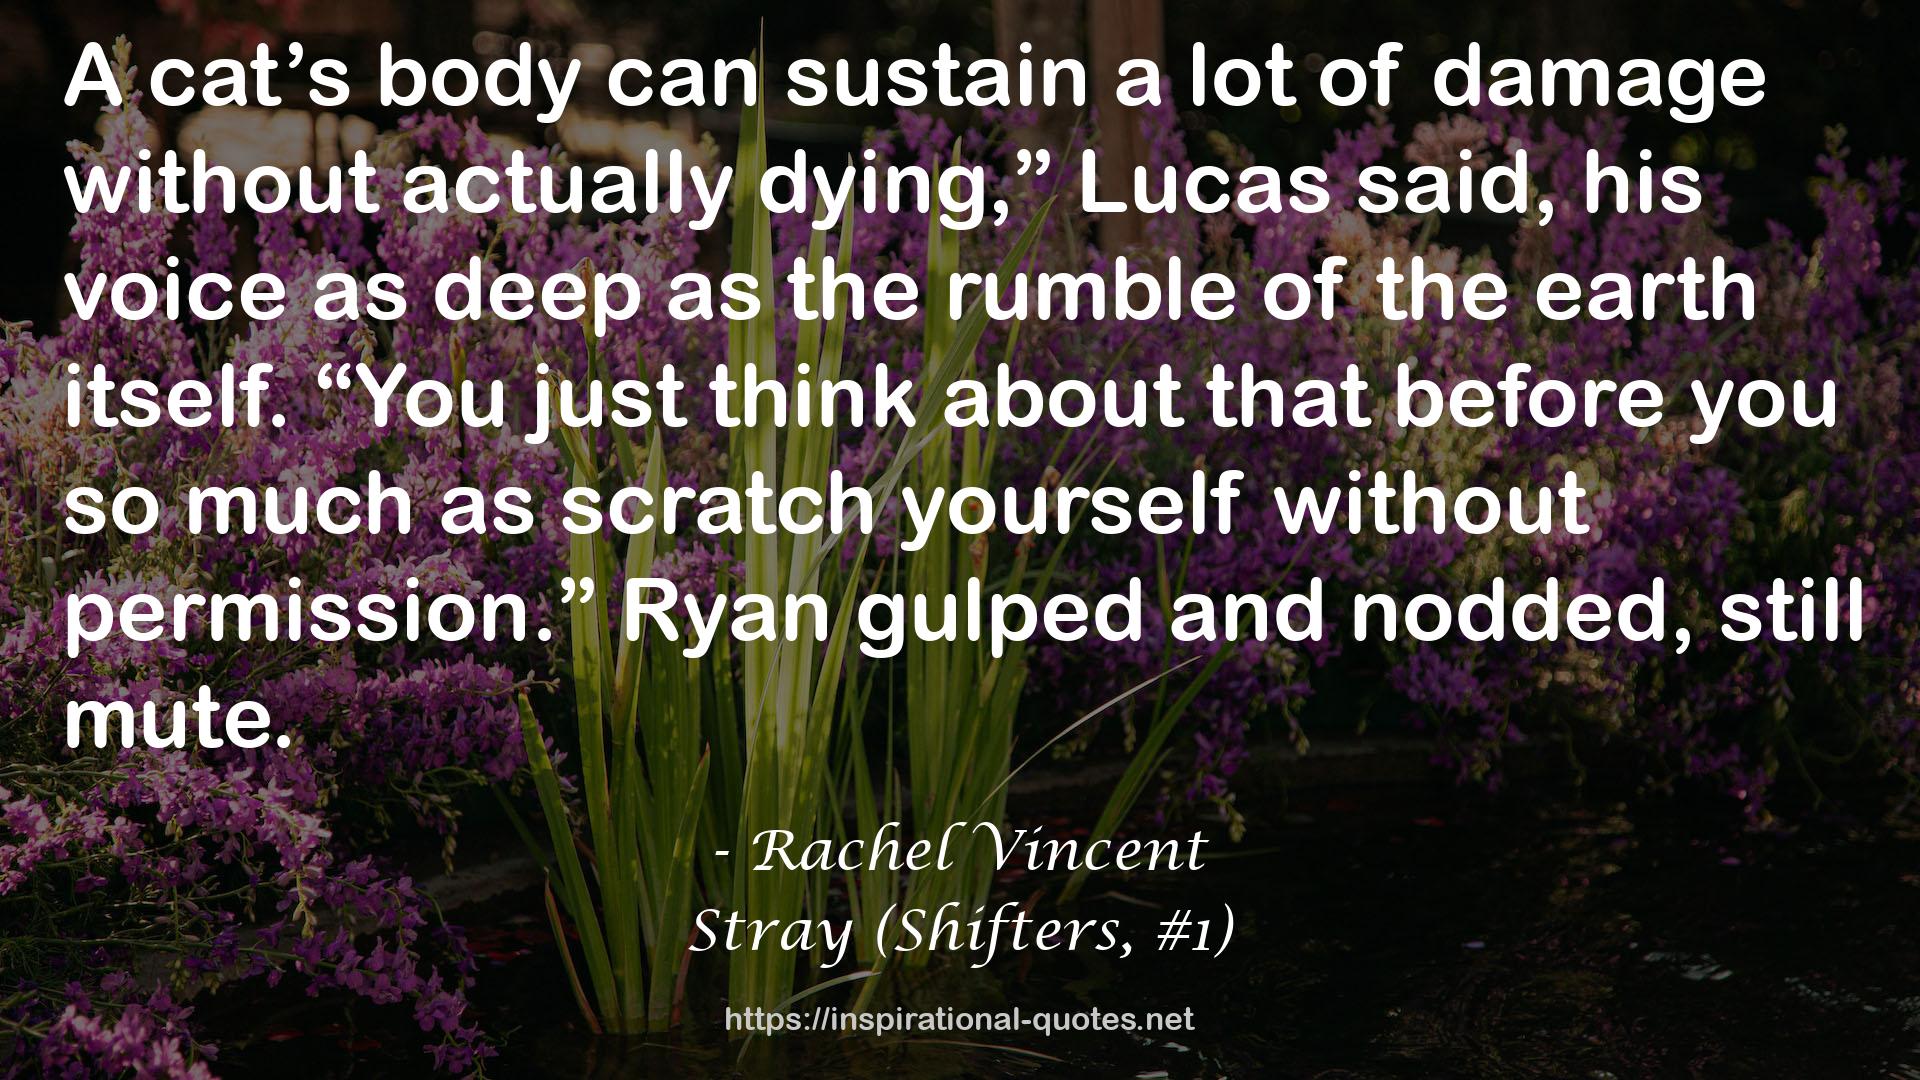 Stray (Shifters, #1) QUOTES